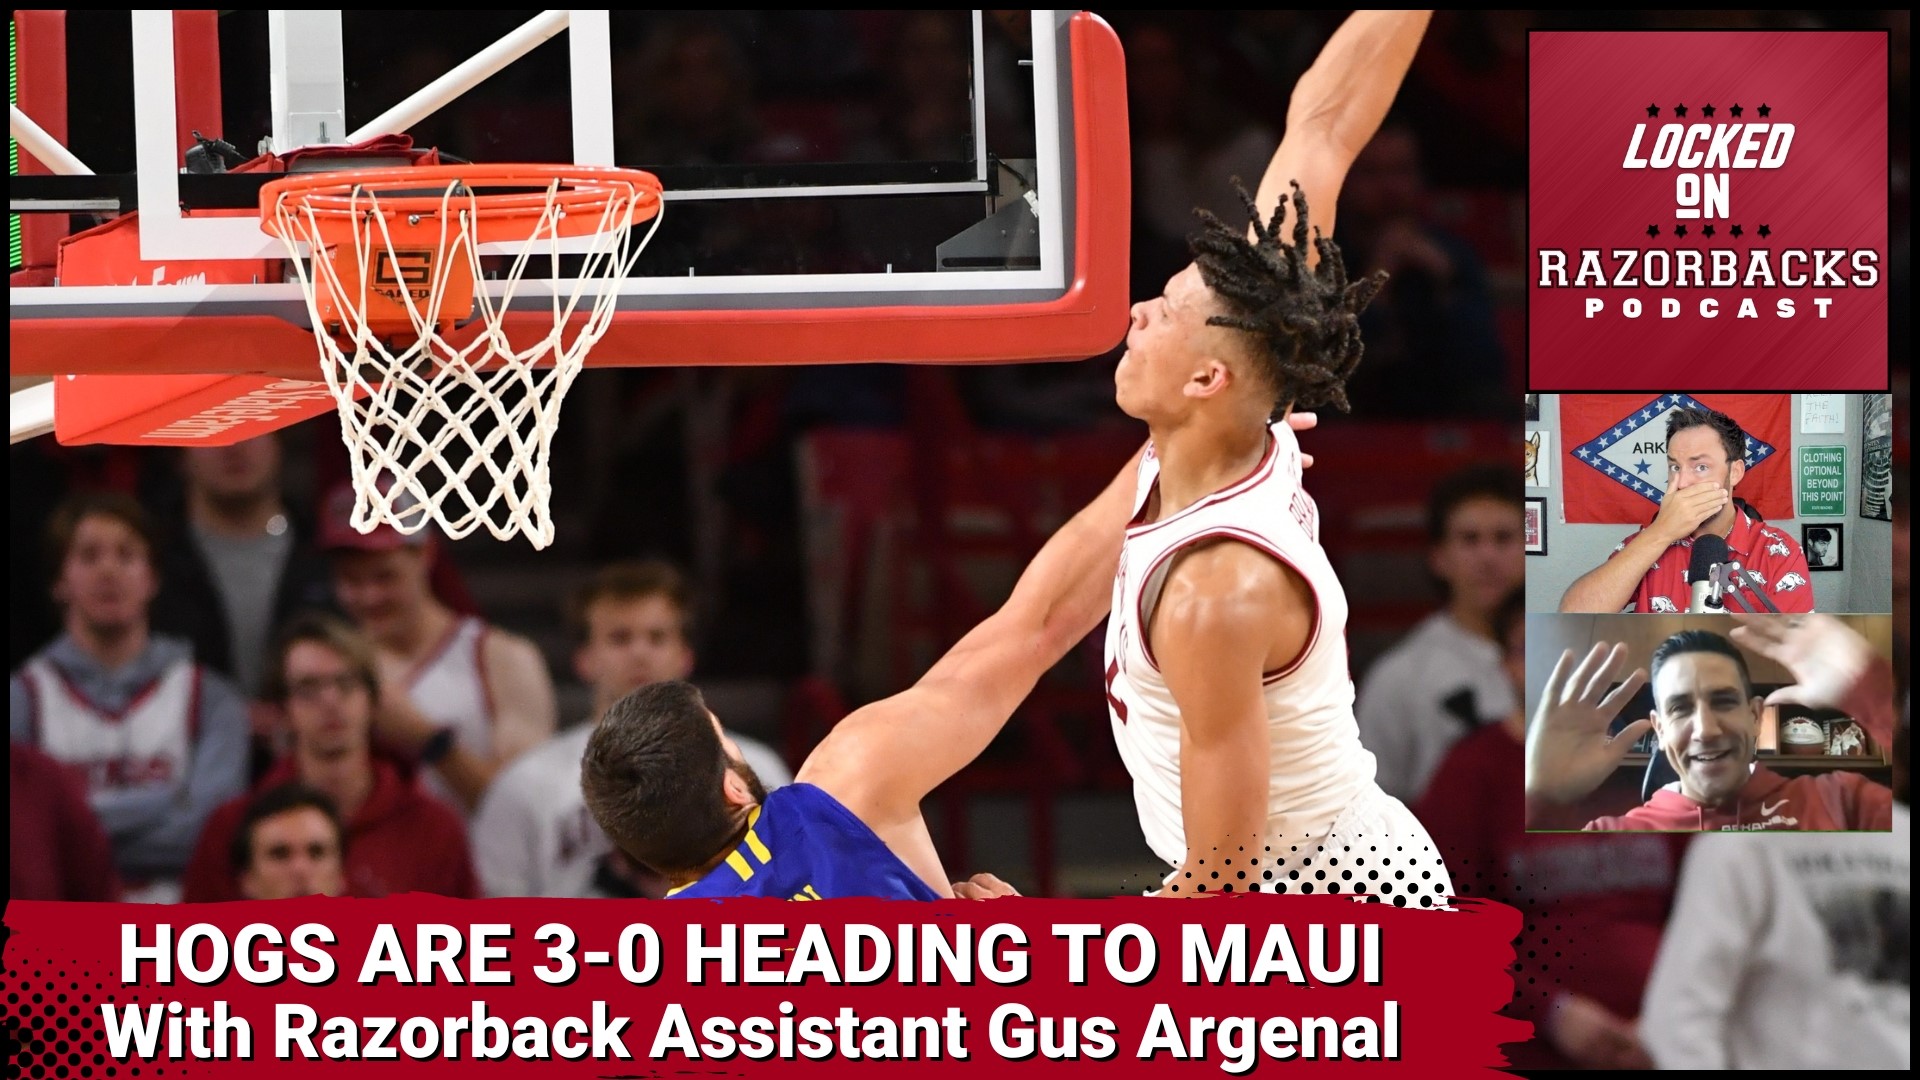 John Nabors is joined by Razorback Assistant Basketball Coach Gus Argenal as they discuss the hot start by the Hogs this season.